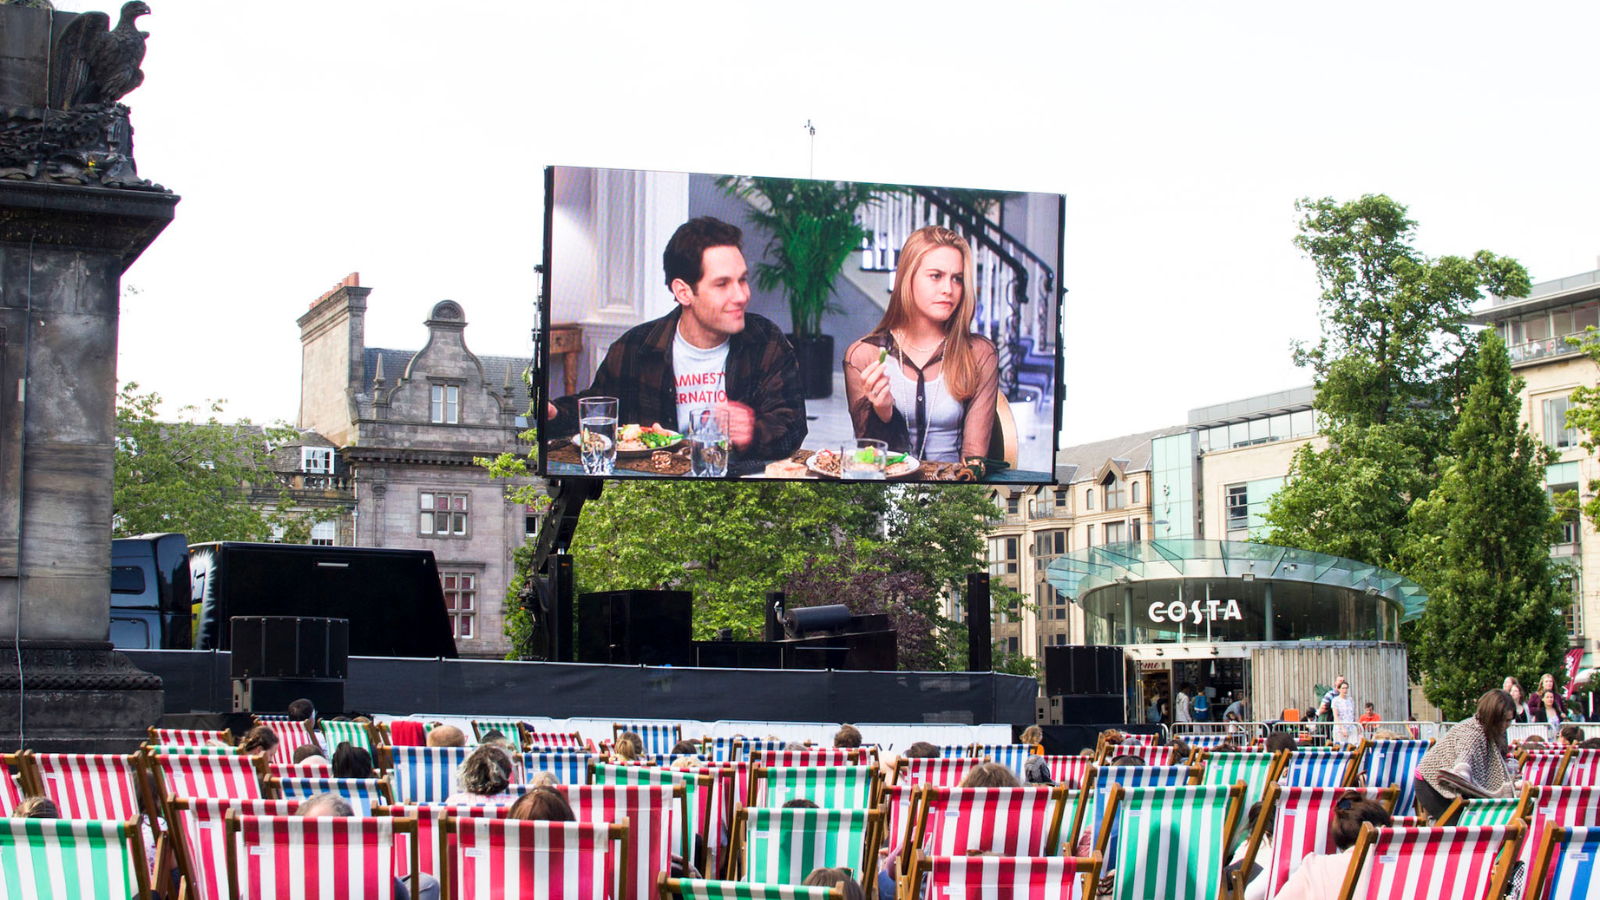 Clueless on large out door screen in park at Ed Film Fest in the City